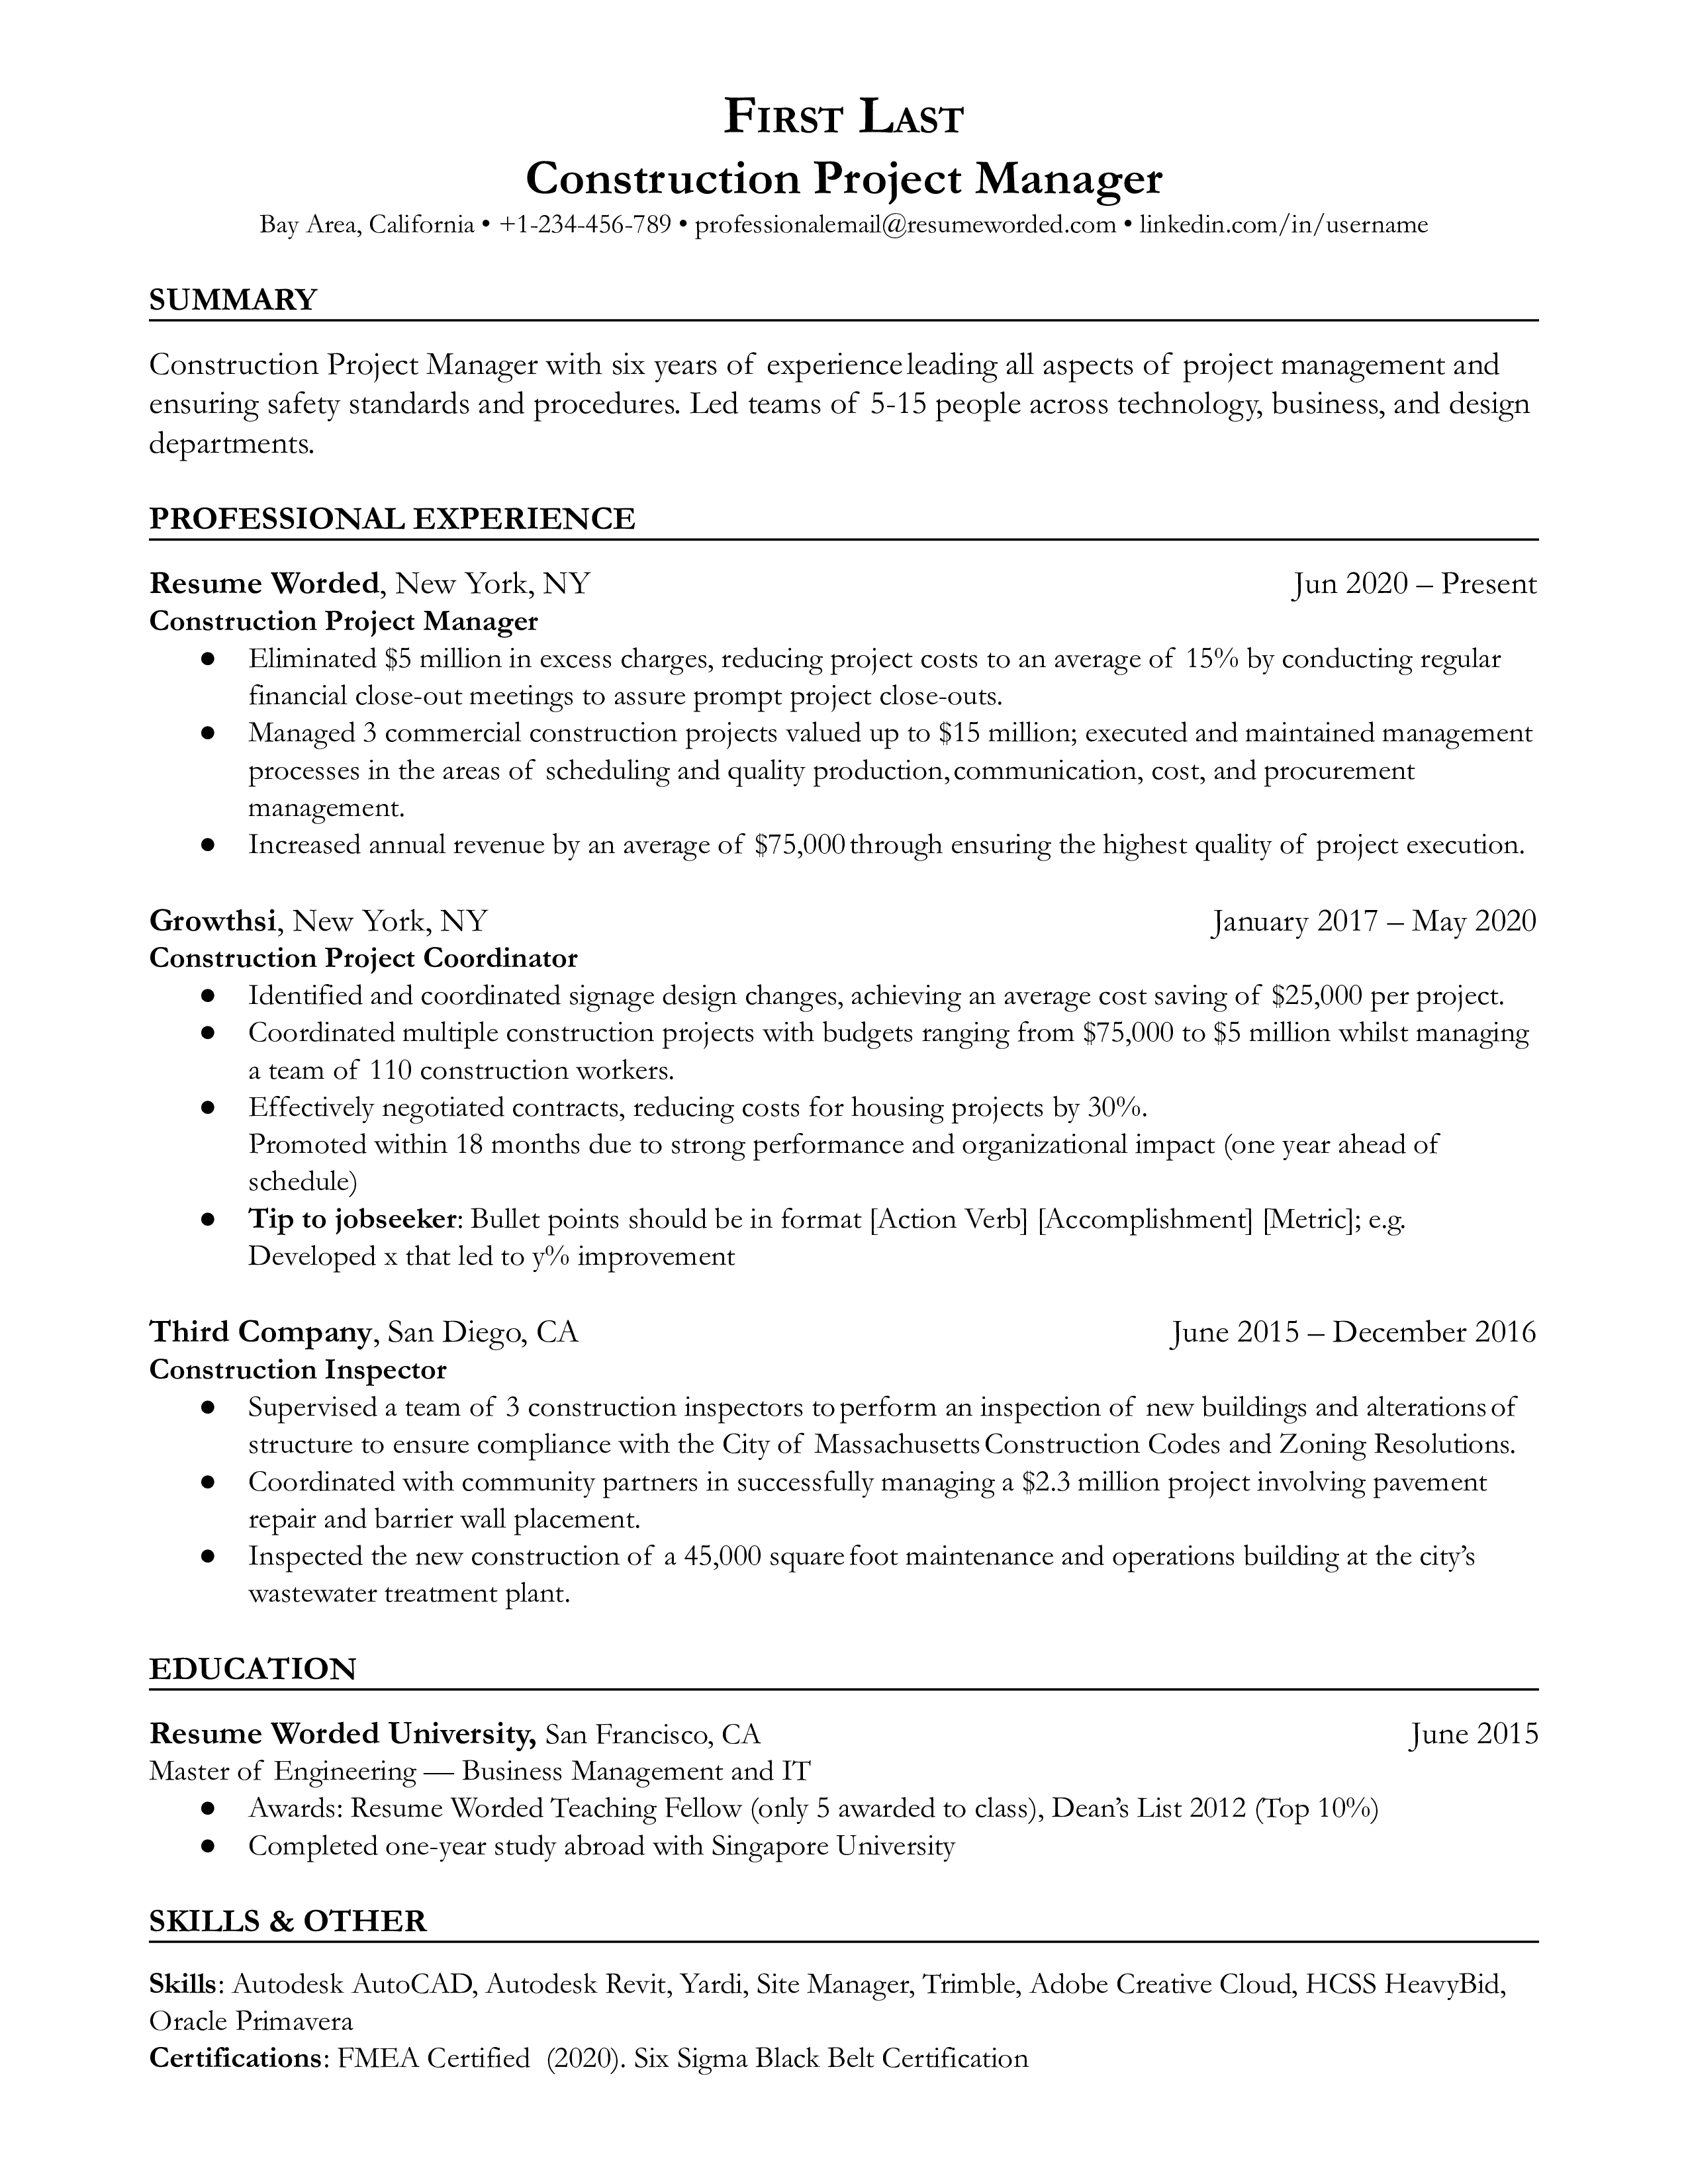 A well-structured CV showcasing a Construction Project Manager's skills and experience.